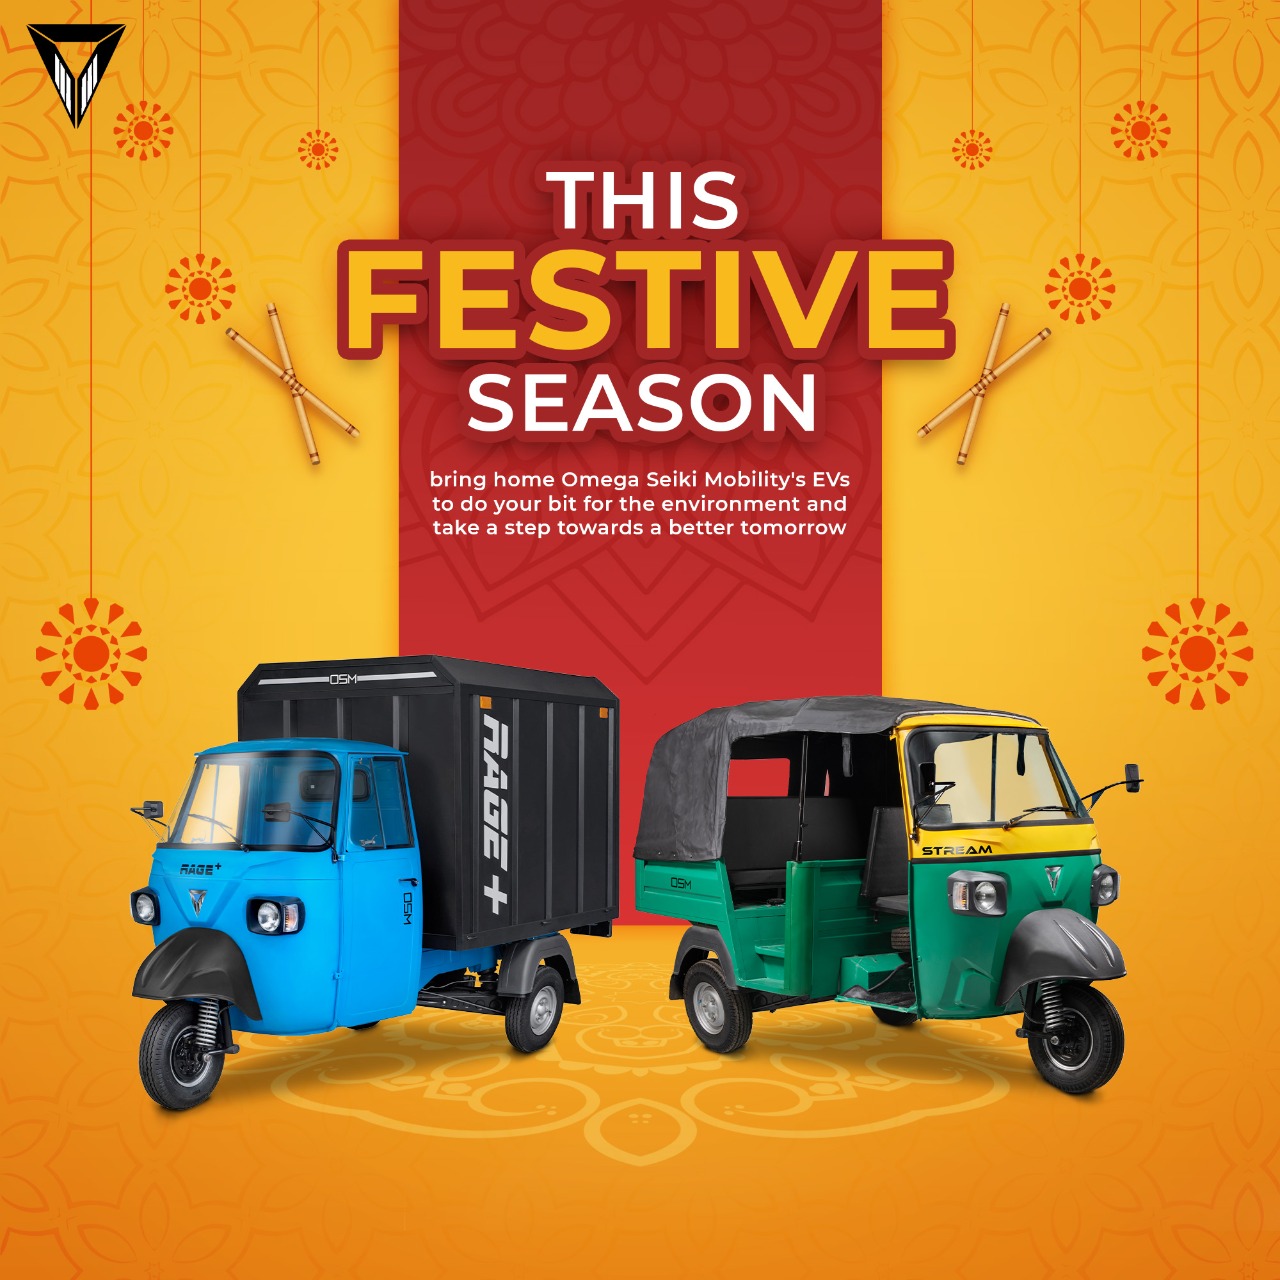 This Festive season celebrate with OSM exciting range of EVs